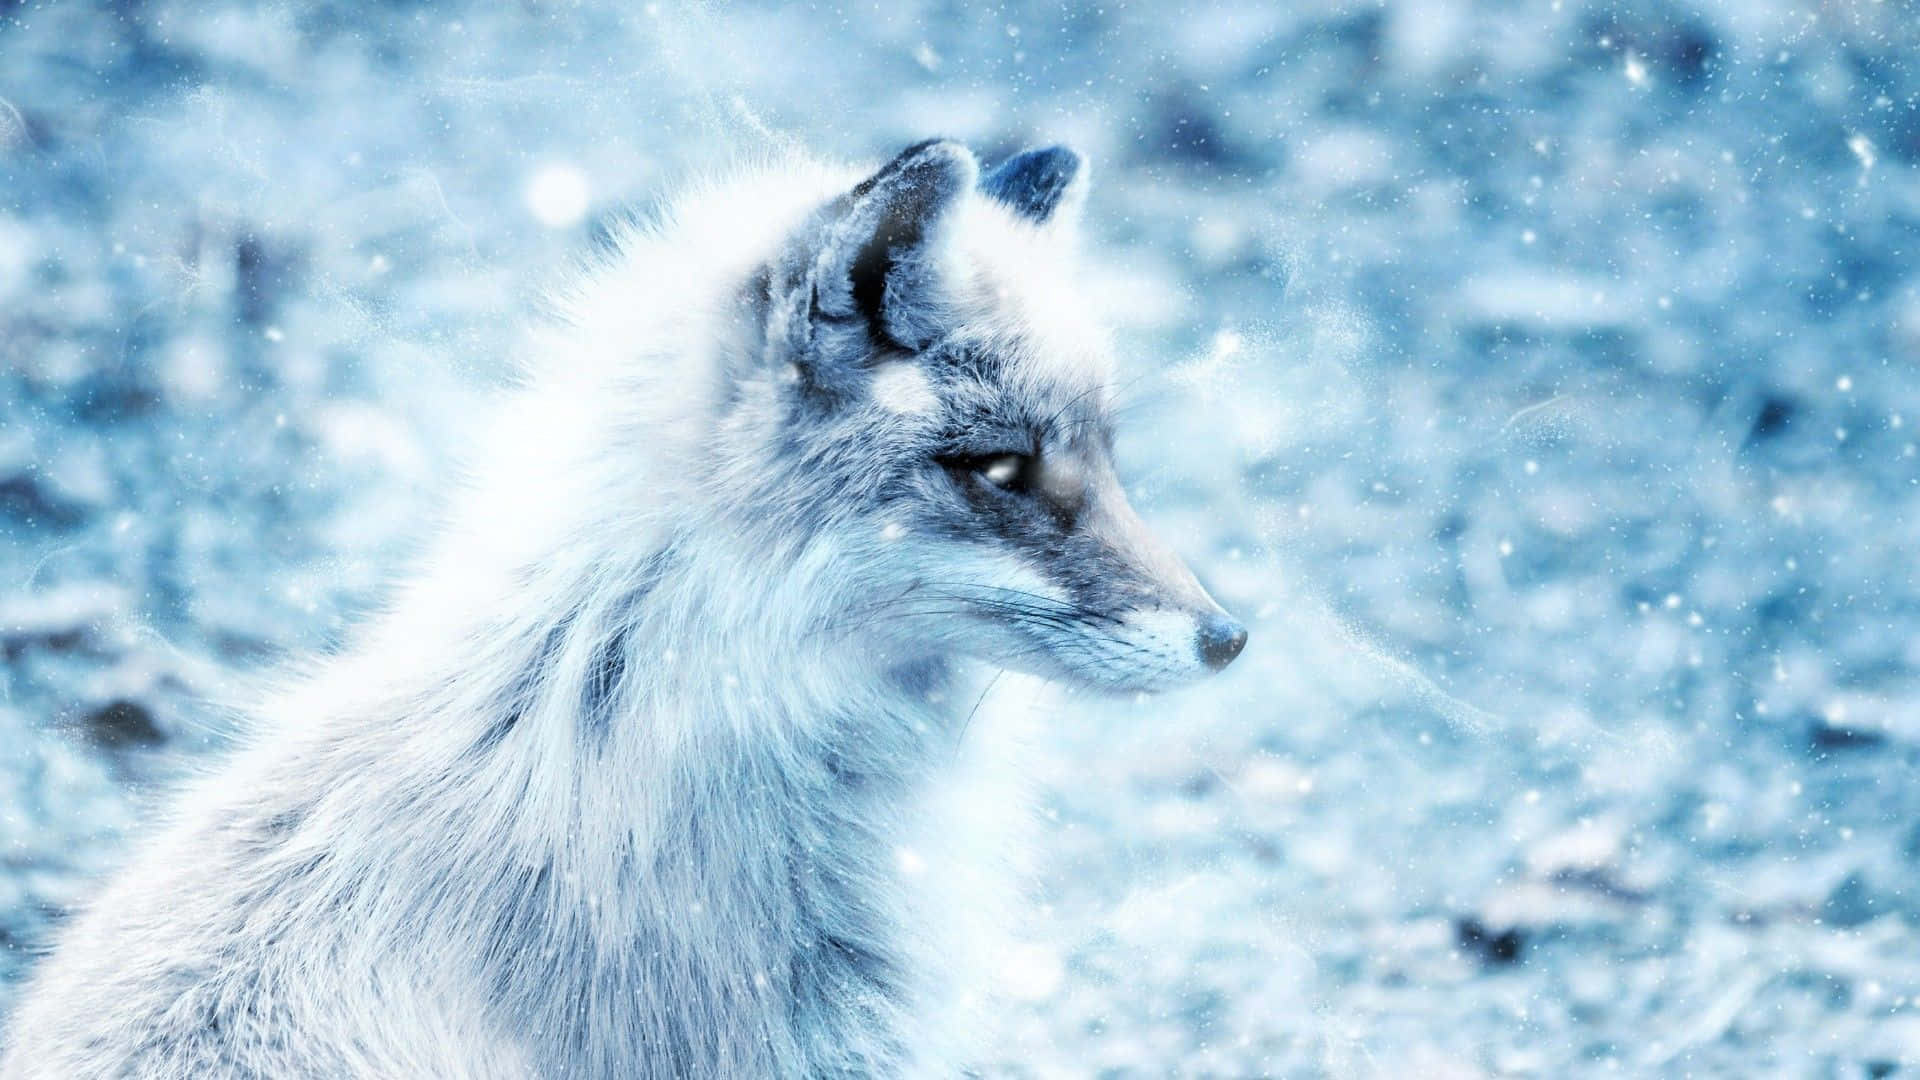 Standing Out - An Arctic Fox Looks on in the Icy Wilderness